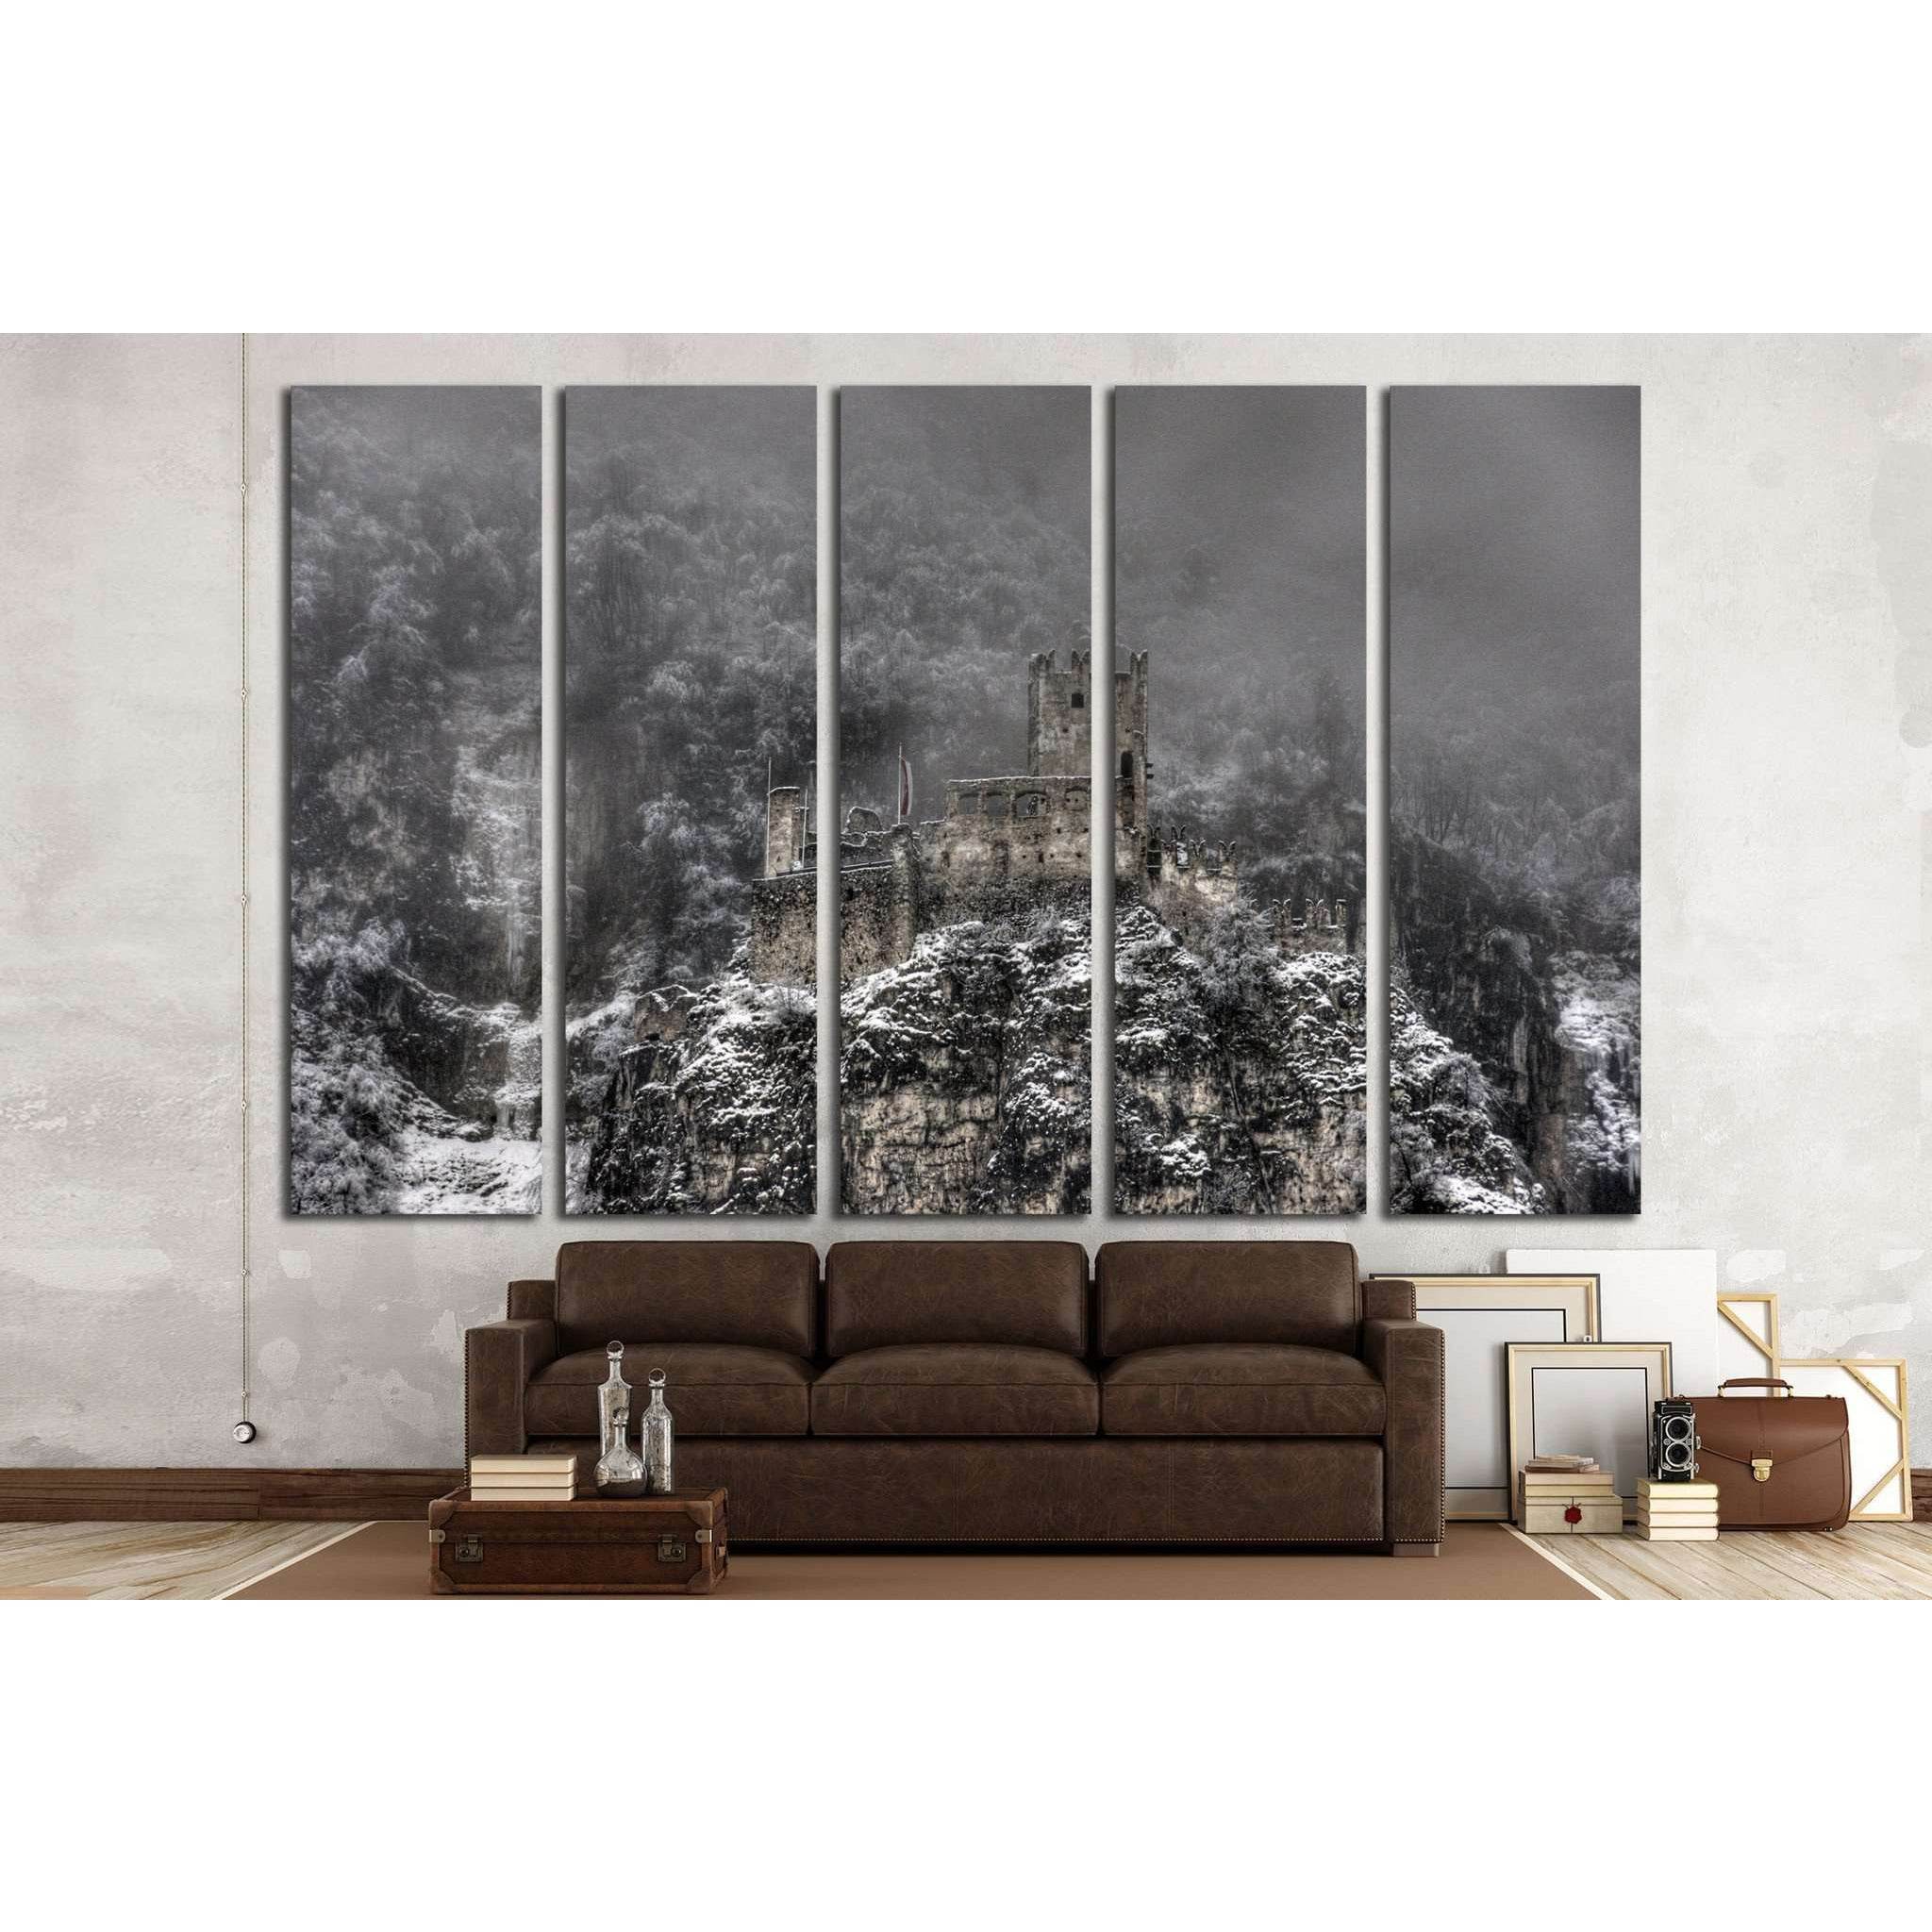 Decayed castle with clouds and snow №1790 Ready to Hang Canvas Print